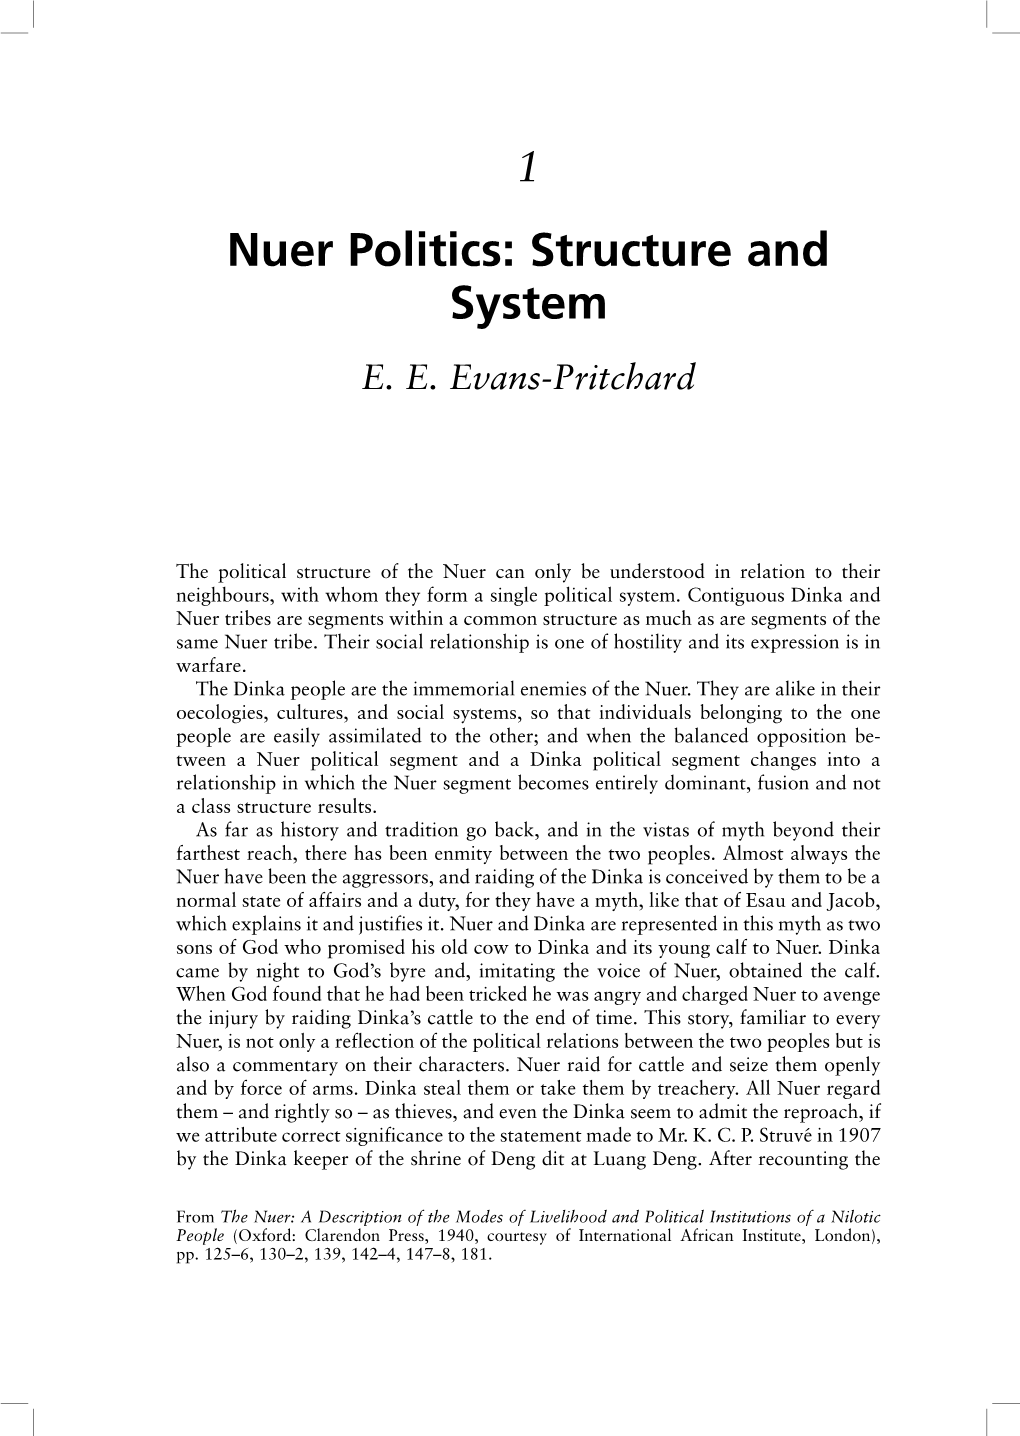 Nuer Politics: Structure and System